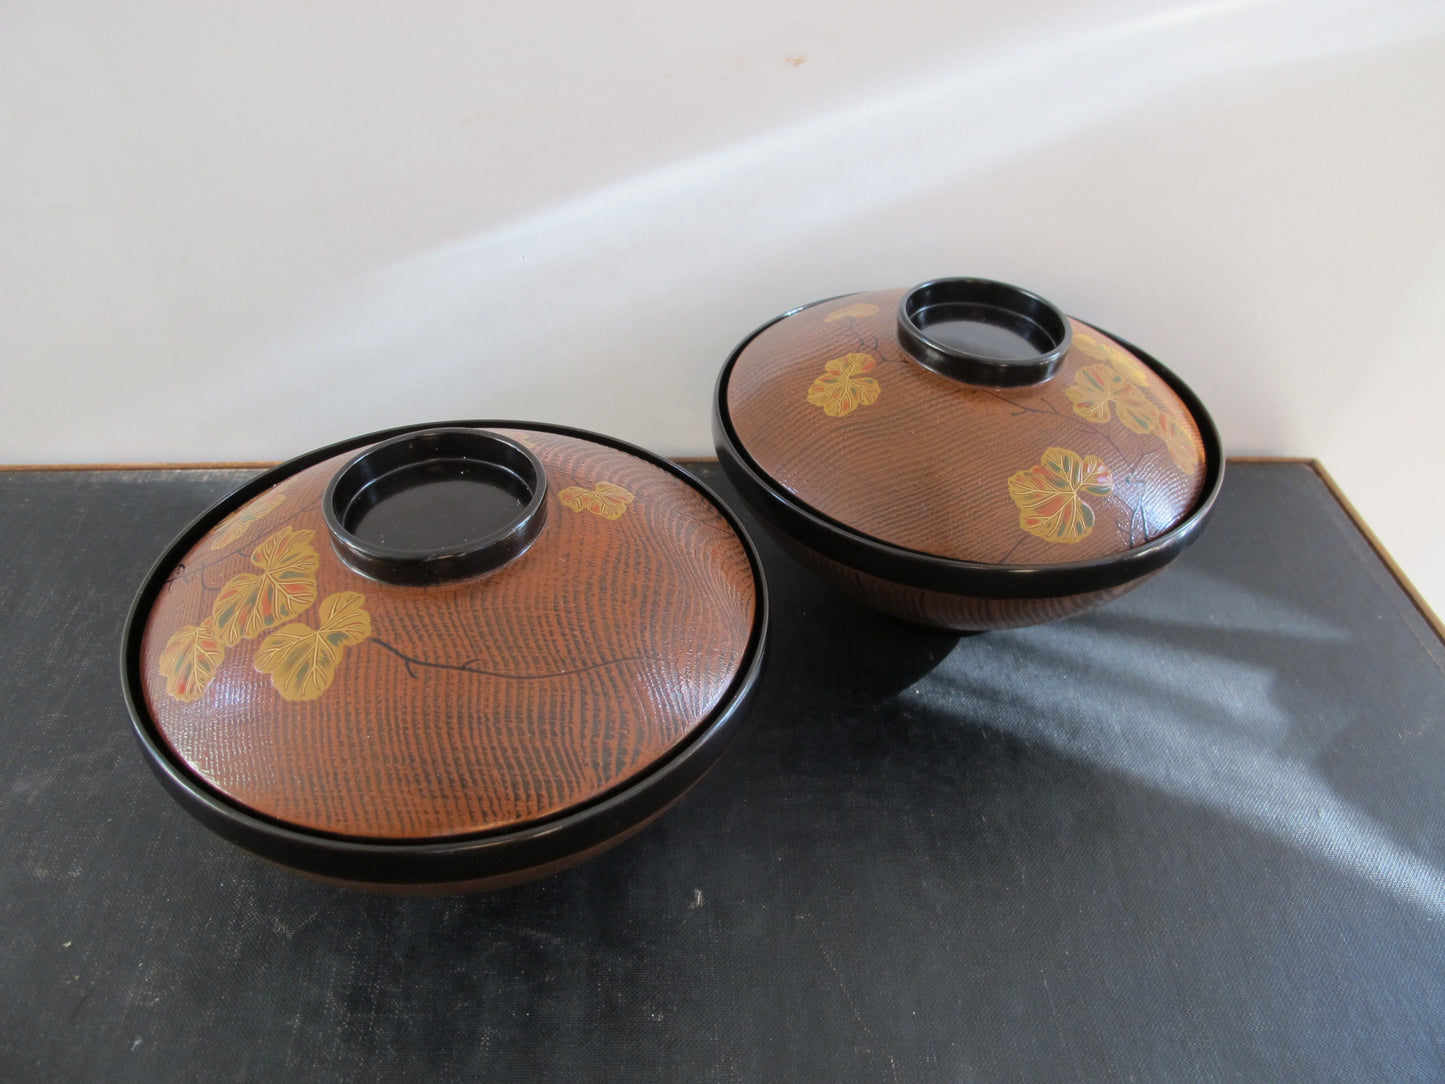 Japanese Lacquer Covered Bowls Pair Midcentury c. 1960 Faux Bois Black Gold Orange Green Autumnal Fall Grape Leaves Lids as Bowls